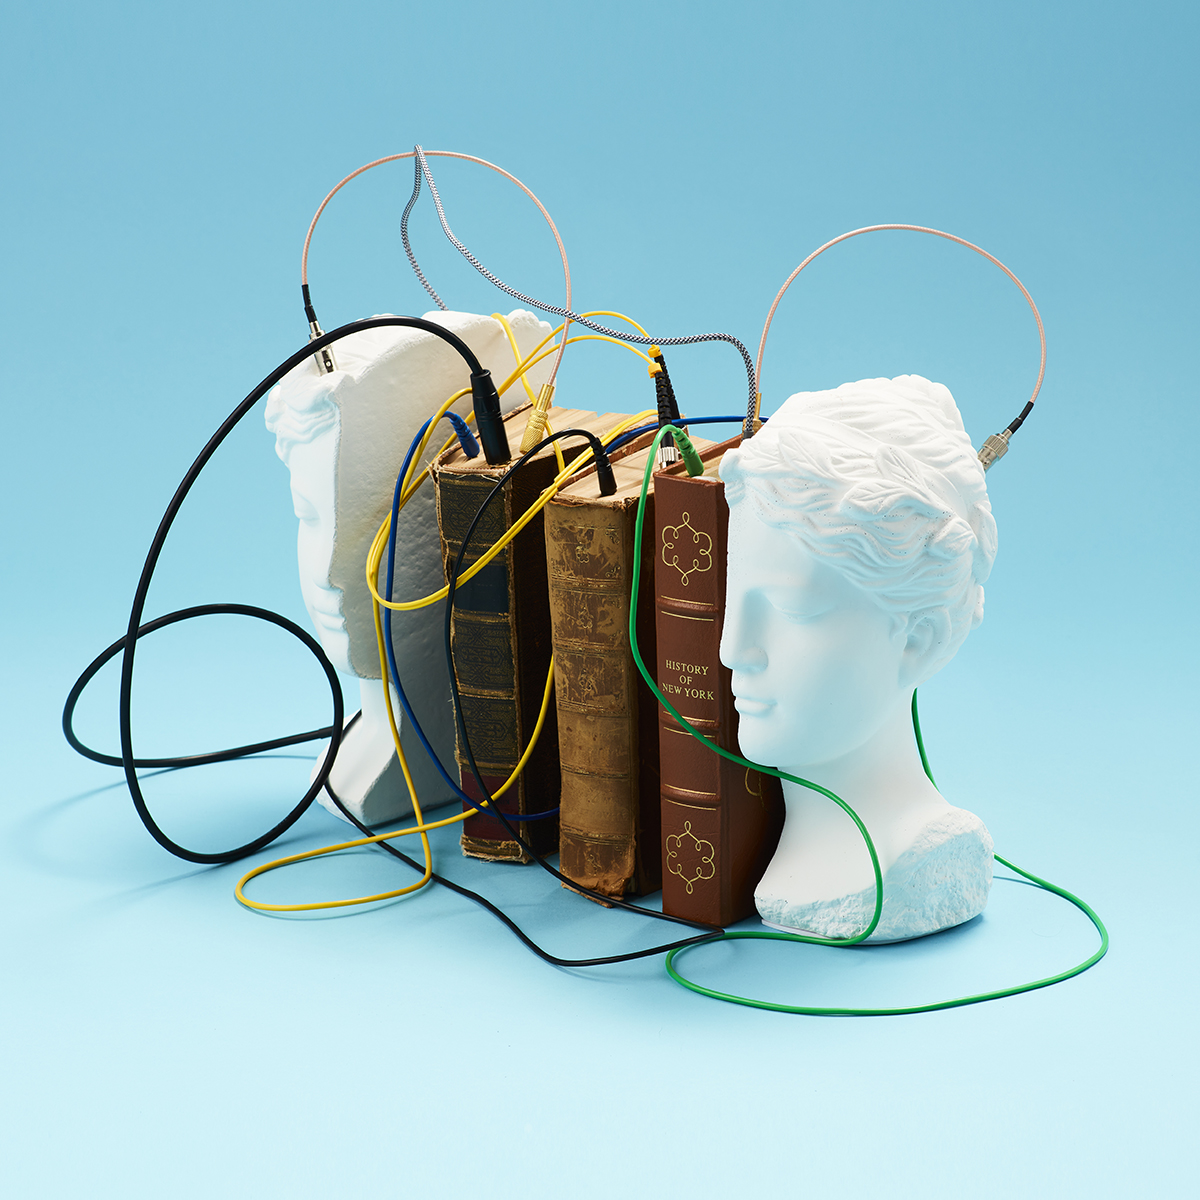 Still life of marble bust split in half bookending old books with wires sticking out of the pages.